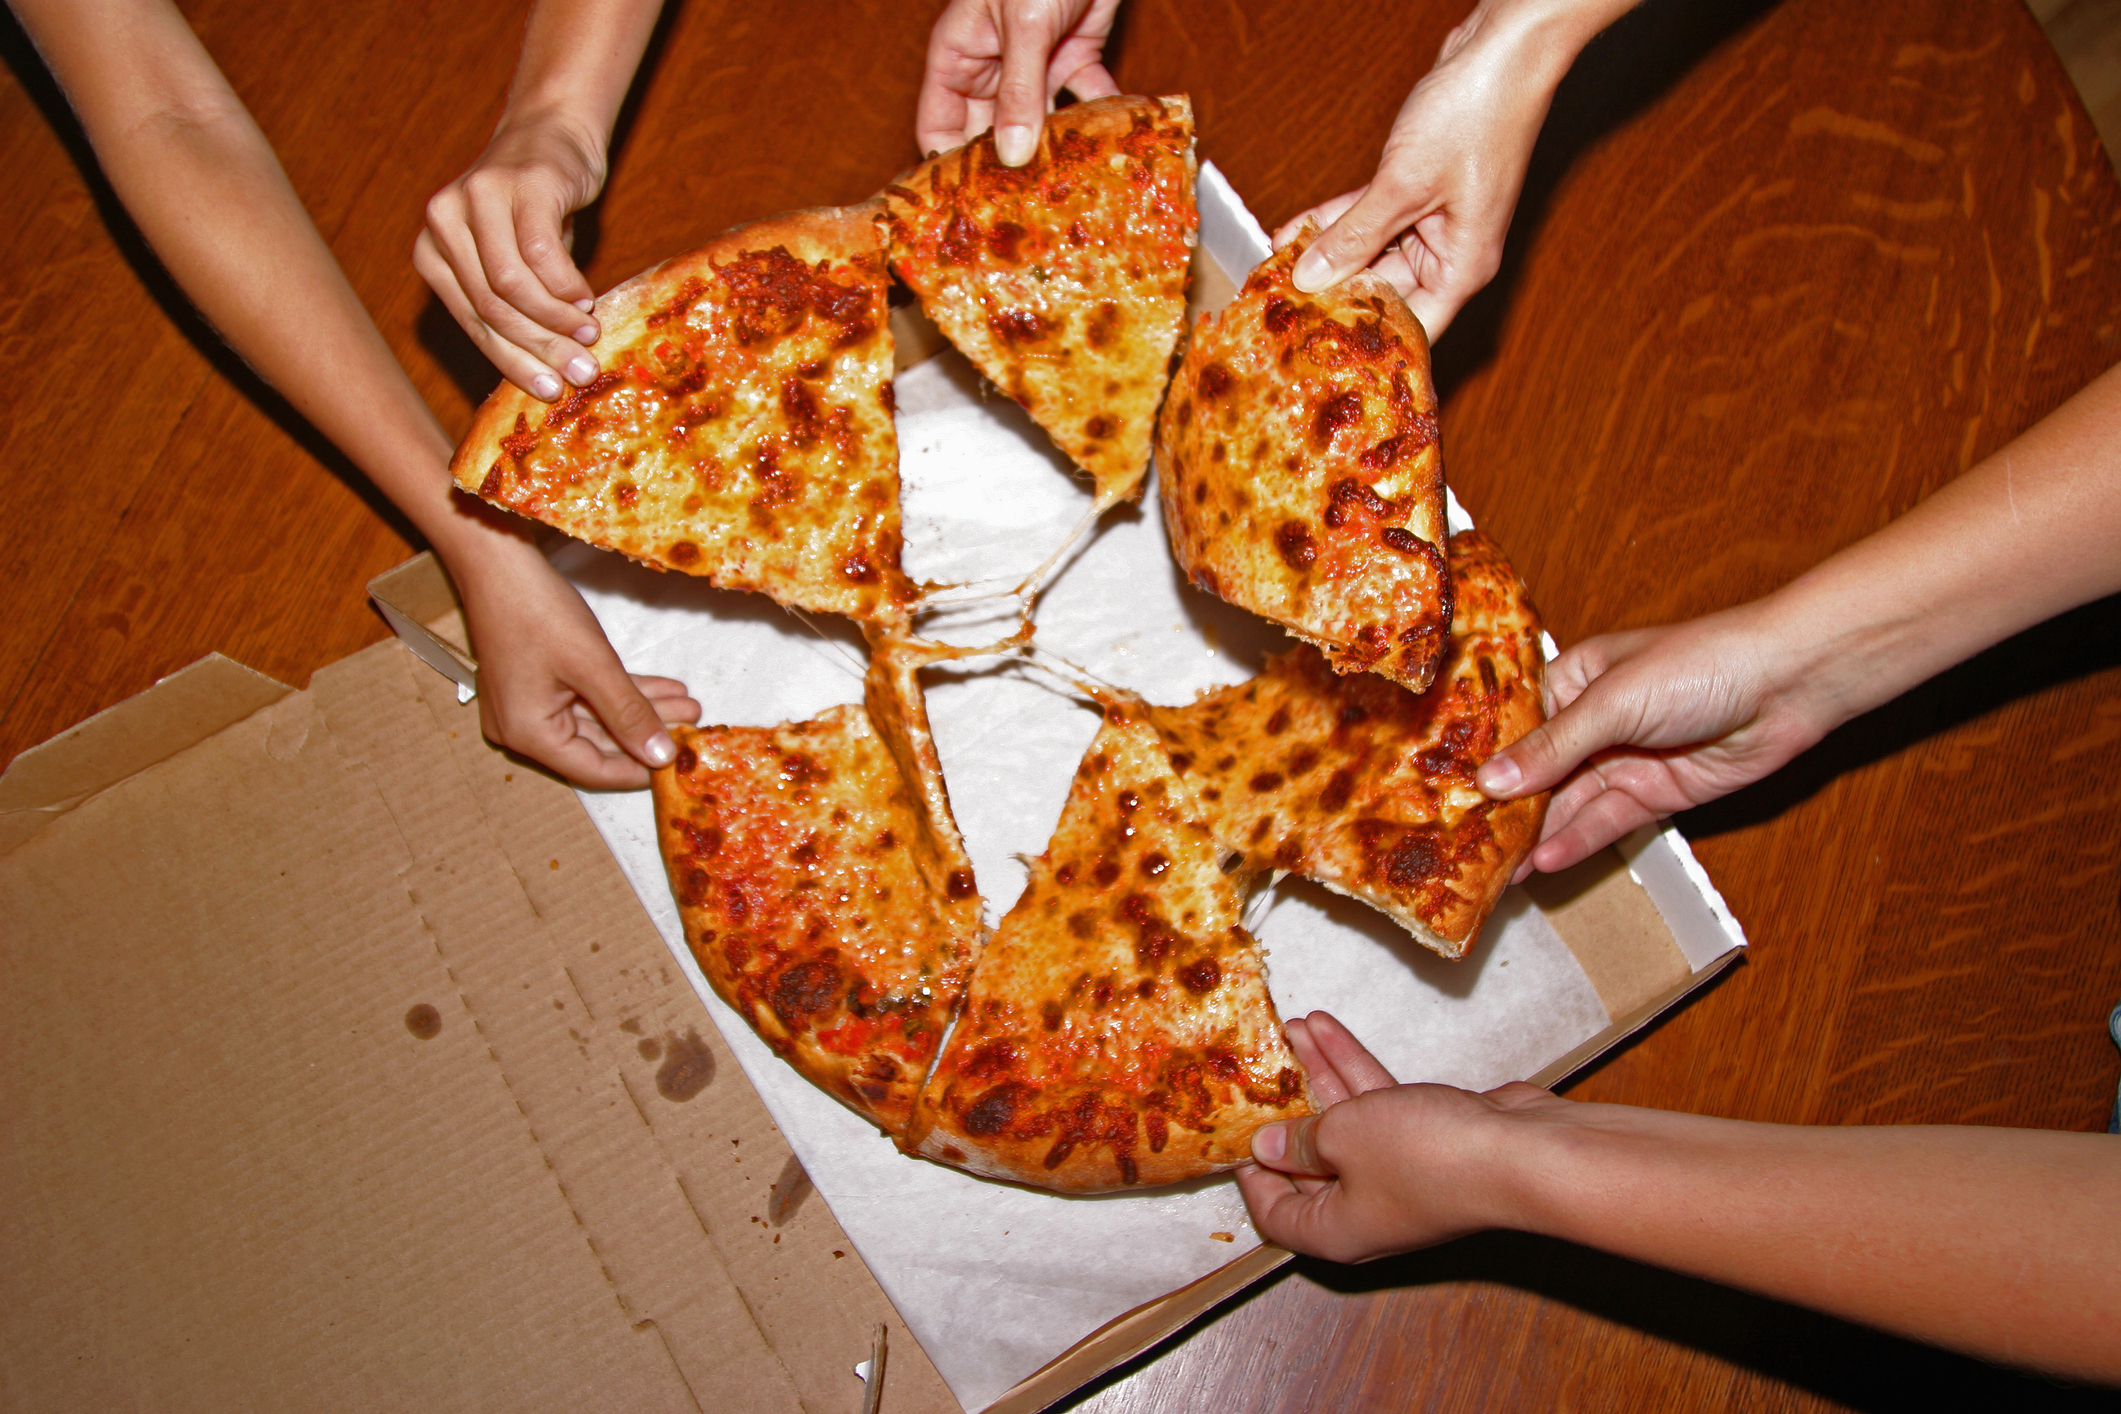 Several hands grabbing slices of pizza from a box